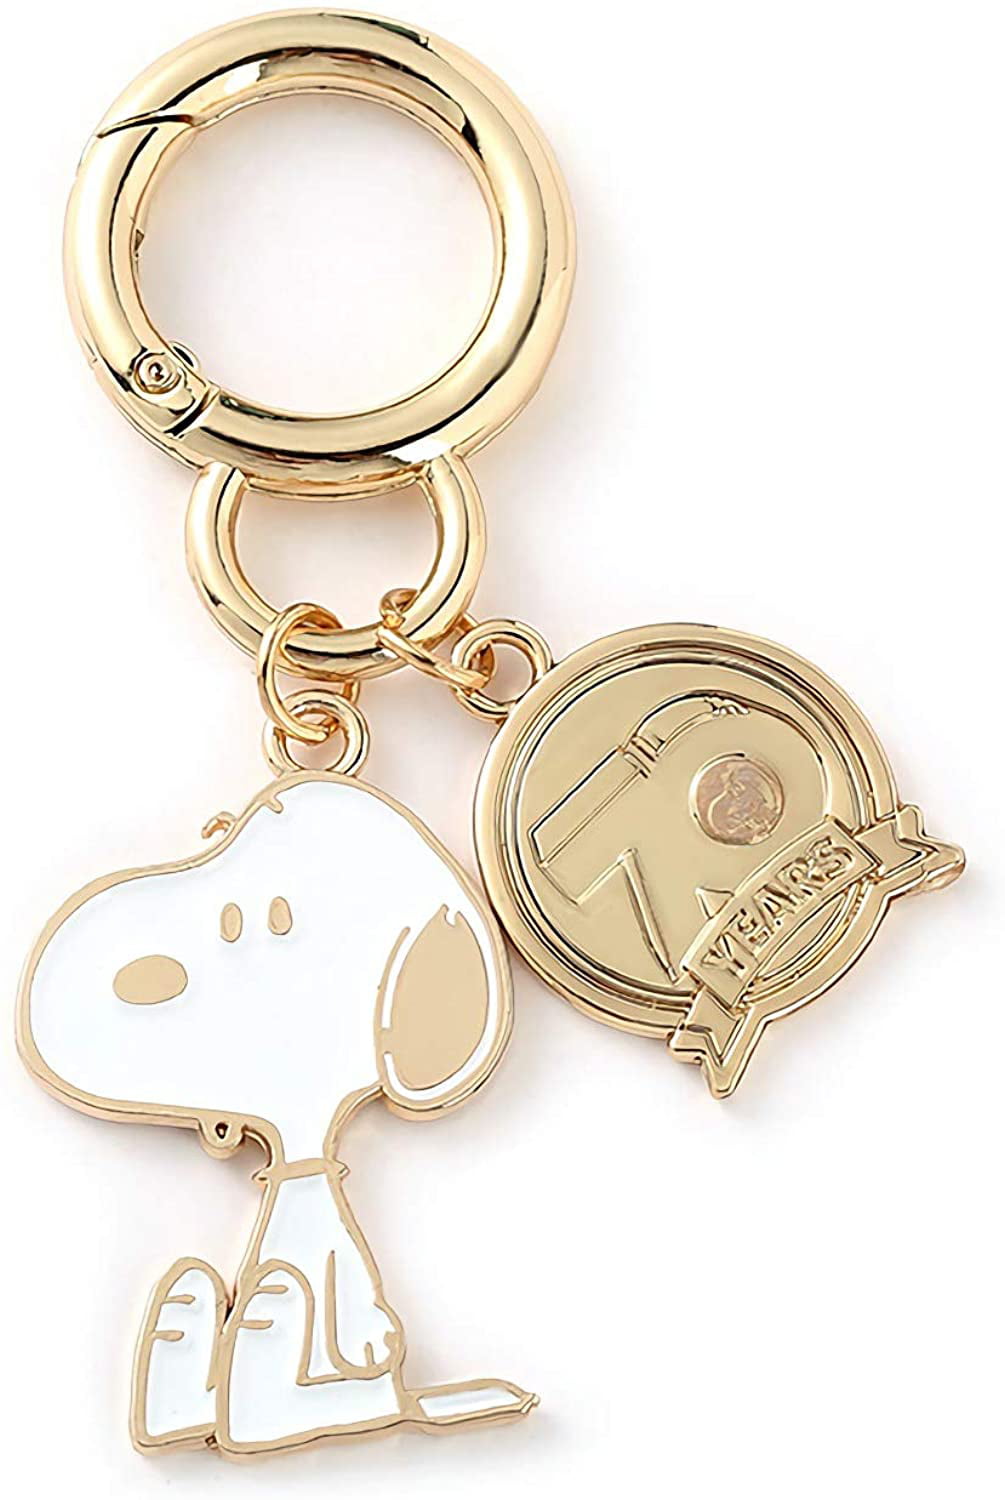 Snoopy 70th Anniversary Collectible Metal Keychain